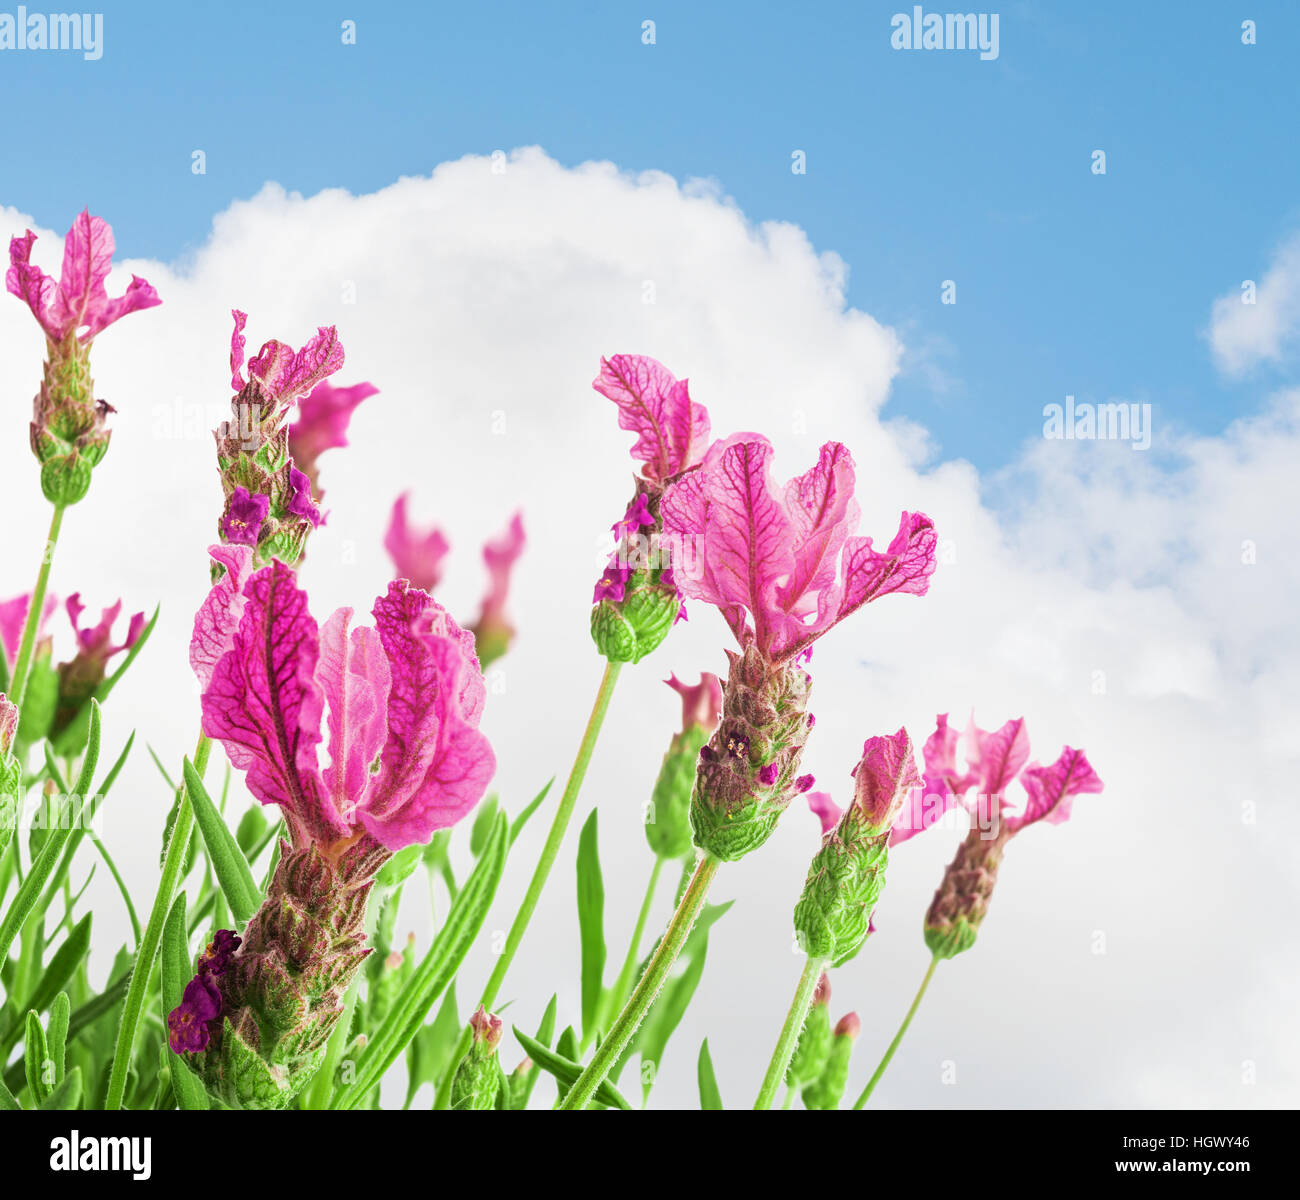 Bush of lavender against cloudy sky background.Selective focus. Stock Photo